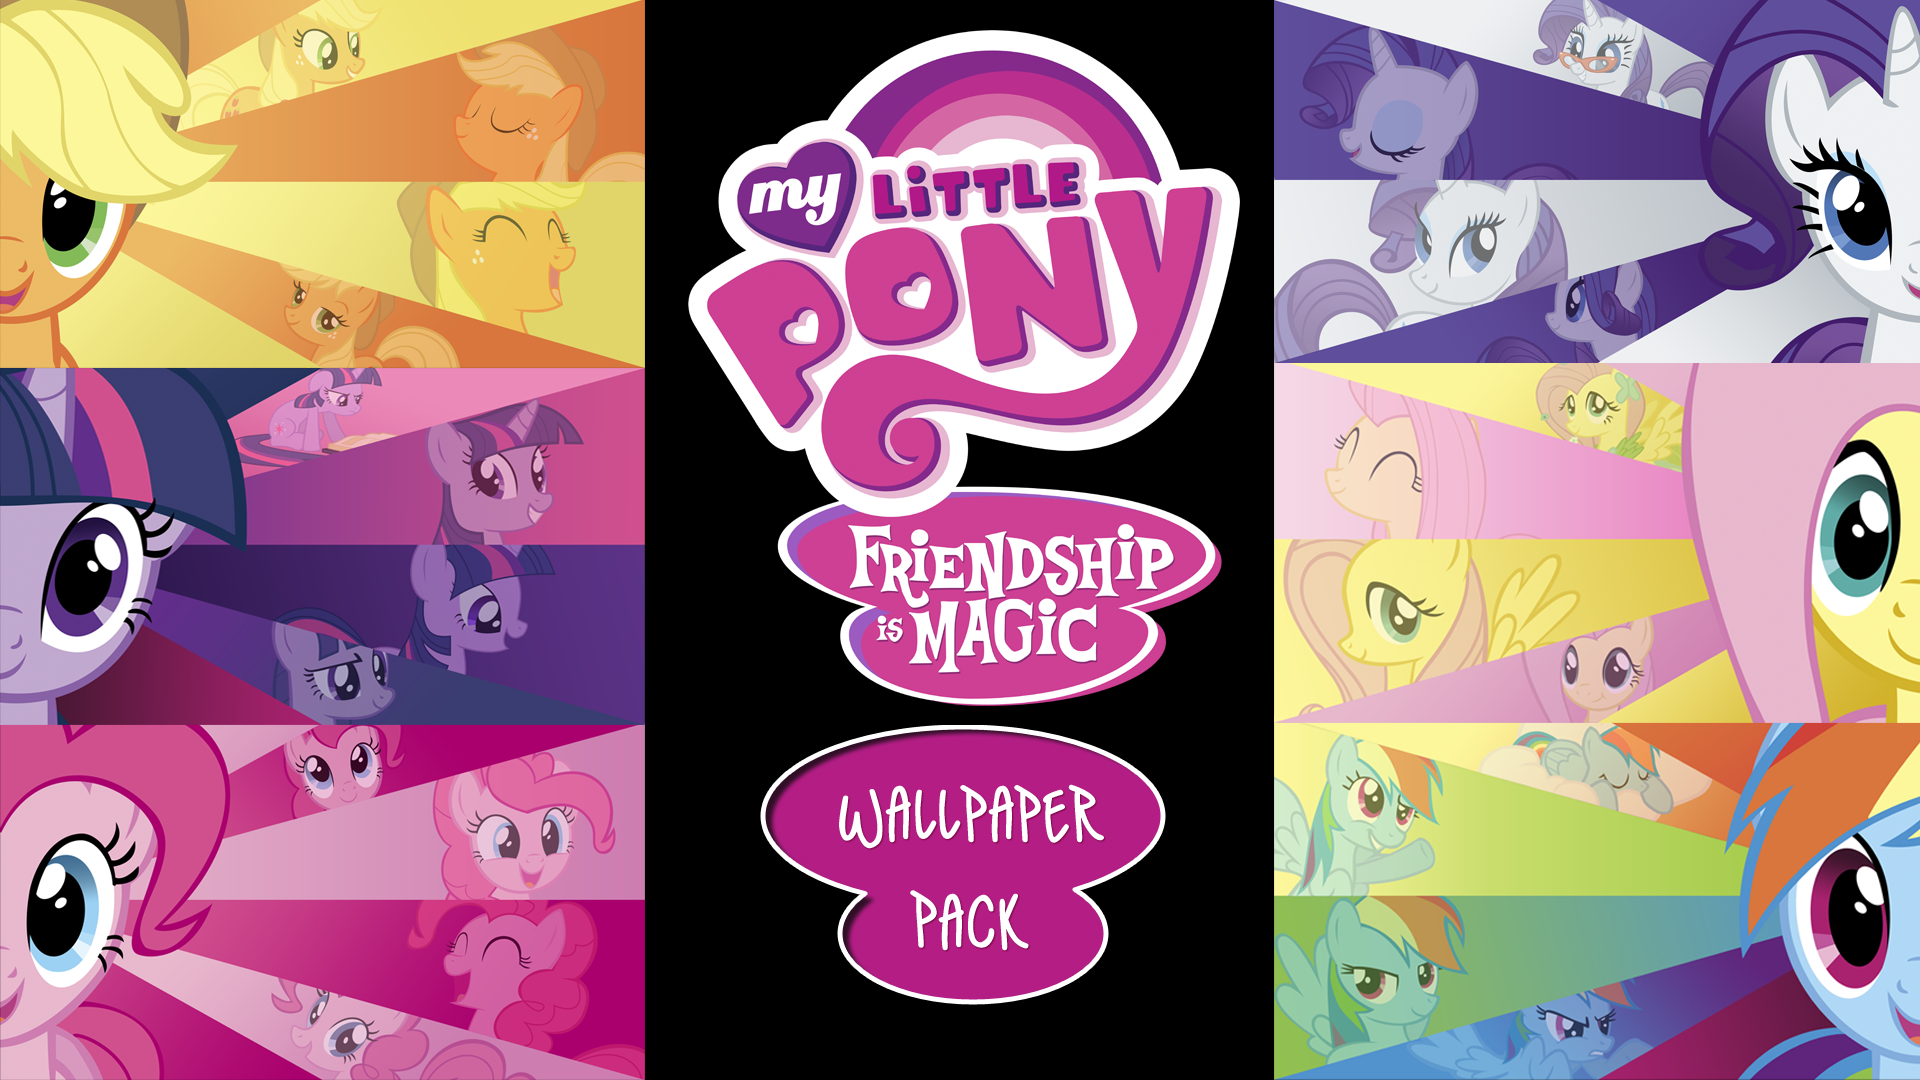 My Little Pony Friendship Is Magic Wallpaper Pack By Bluedragonhans